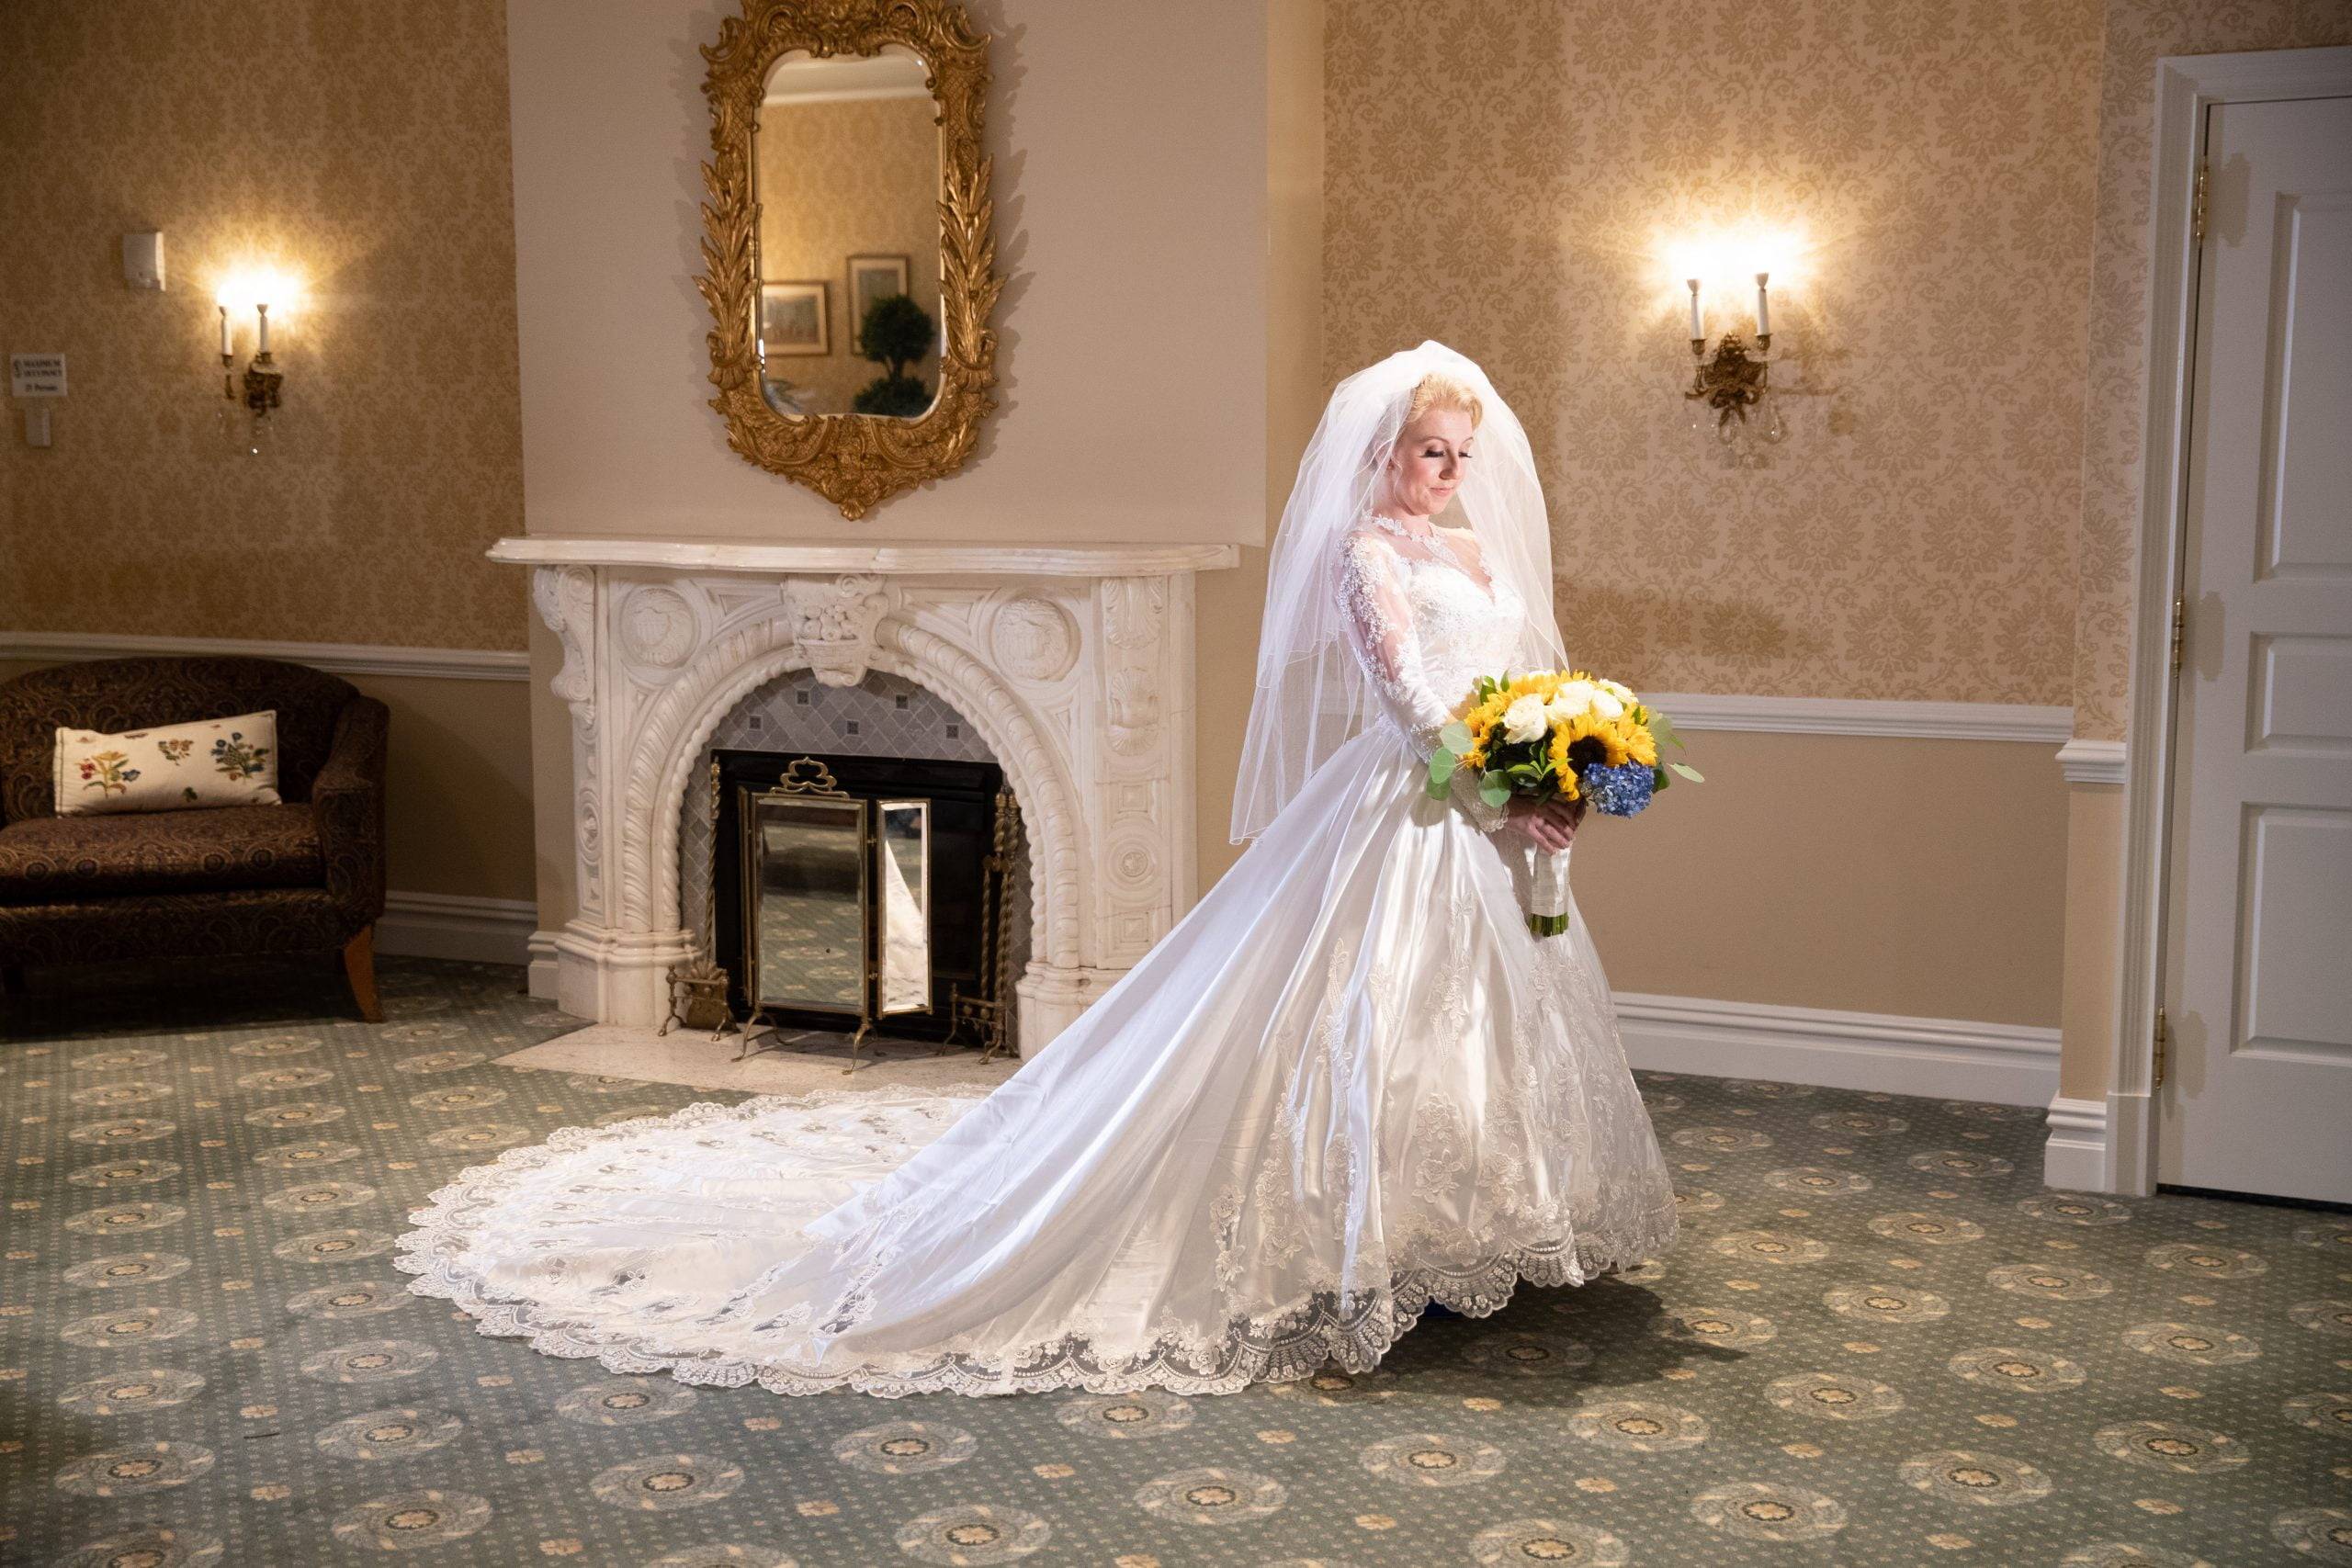 A bride in a wedding dress standing in front of a fireplace.